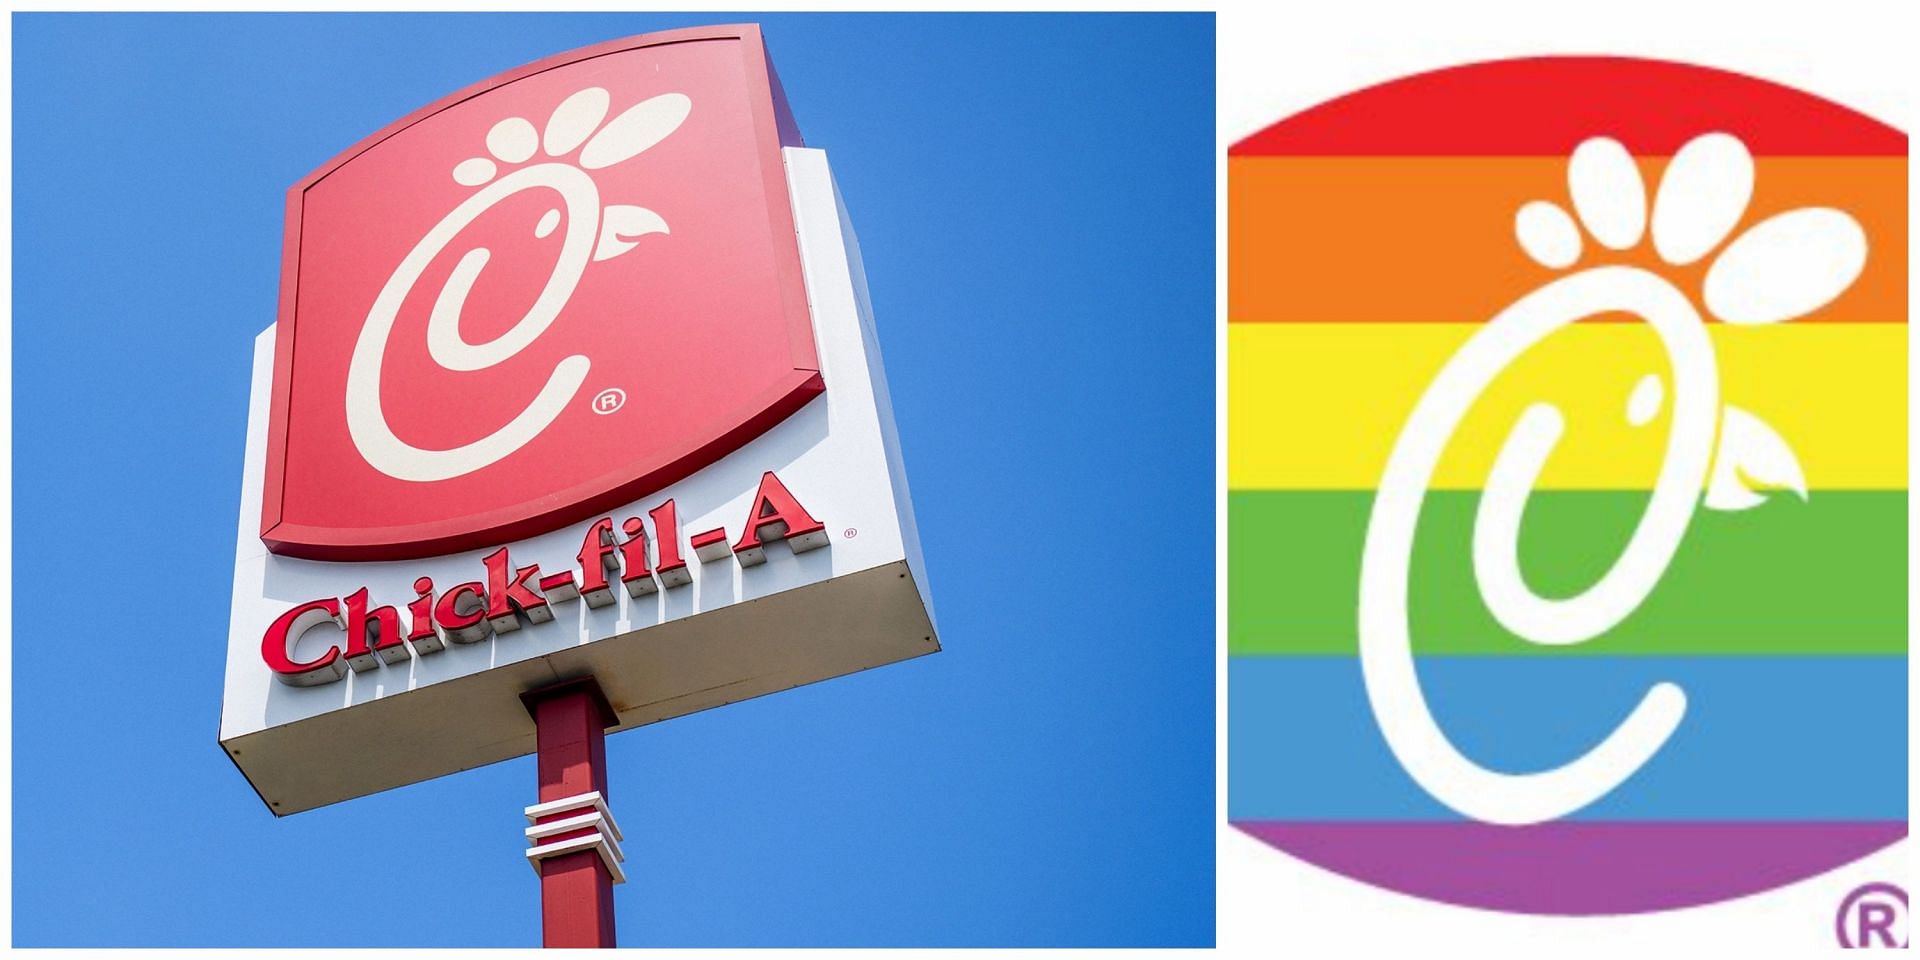 Social media users reacted to the fake news of the fast food chain changing its logo to a LGBTQ-themed one ahead of the Pride Month. (Image via Facebook and Chick Fil A)